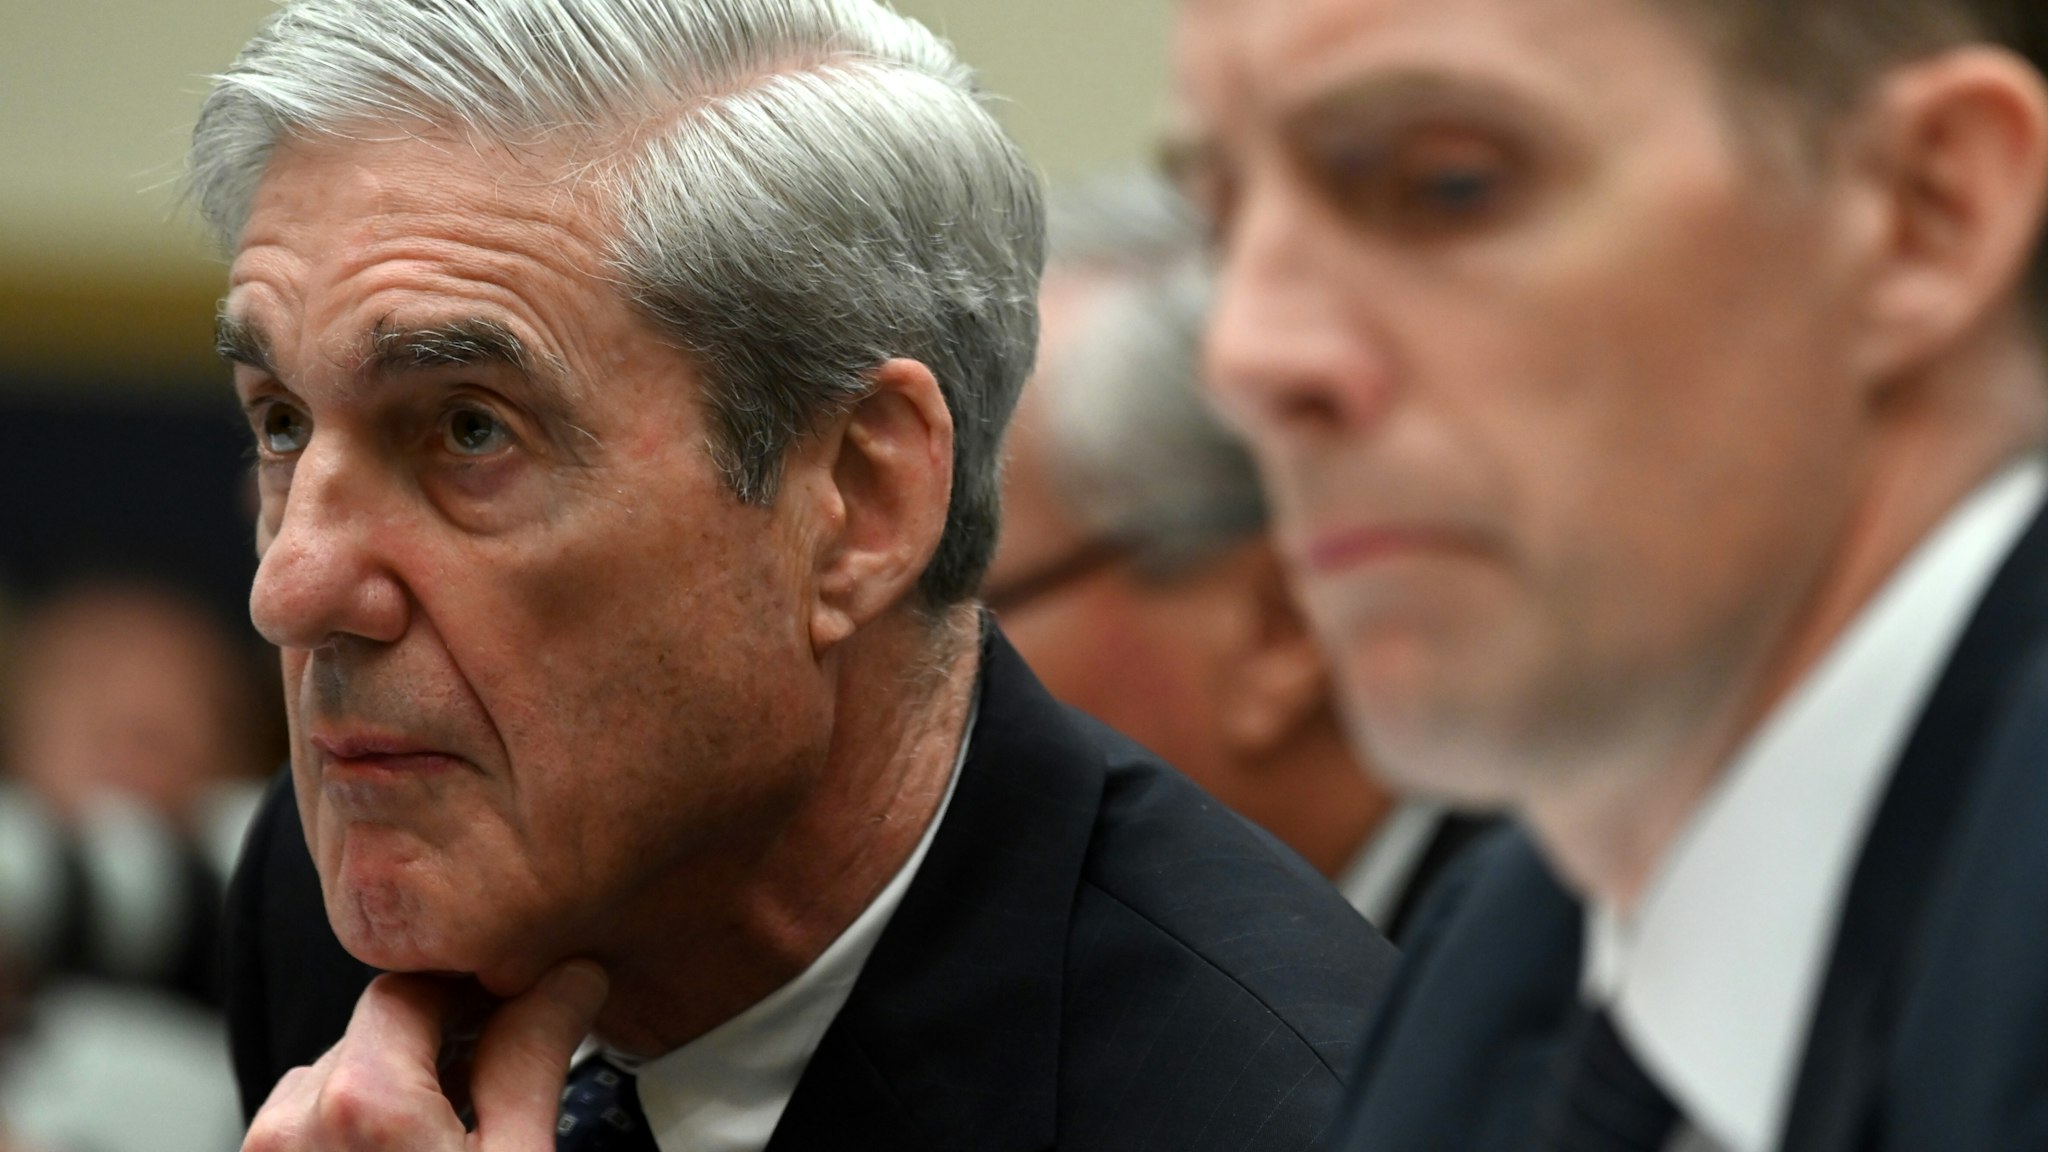 ormer Deputy Special Counsel Aaron Zebley (R) takes notes during testimony by former Special Prosecutor Robert Mueller (L) during a hearing before Congress on July 24, 2019, in Washington, DC. - Mueller told US lawmakers Wednesday that his report on Russia election interference does not exonerate Donald Trump, as the president has repeatedly asserted. (Photo by ANDREW CABALLERO-REYNOLDS / AFP) (Photo credit should read ANDREW CABALLERO-REYNOLDS/AFP via Getty Images)